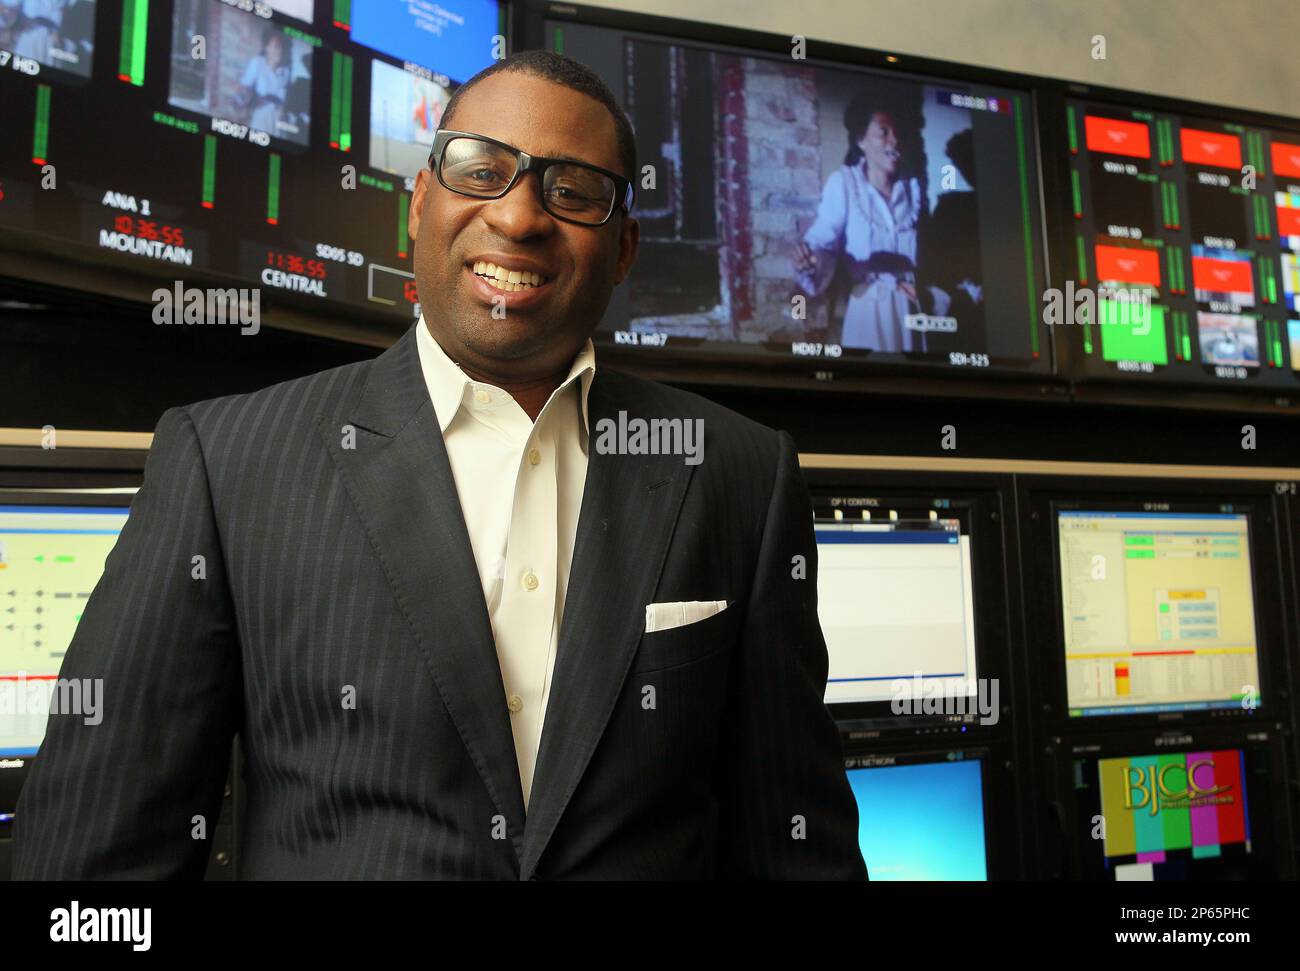 Portrait of Bounce TV executive Ryan Glover, inside the broadcast